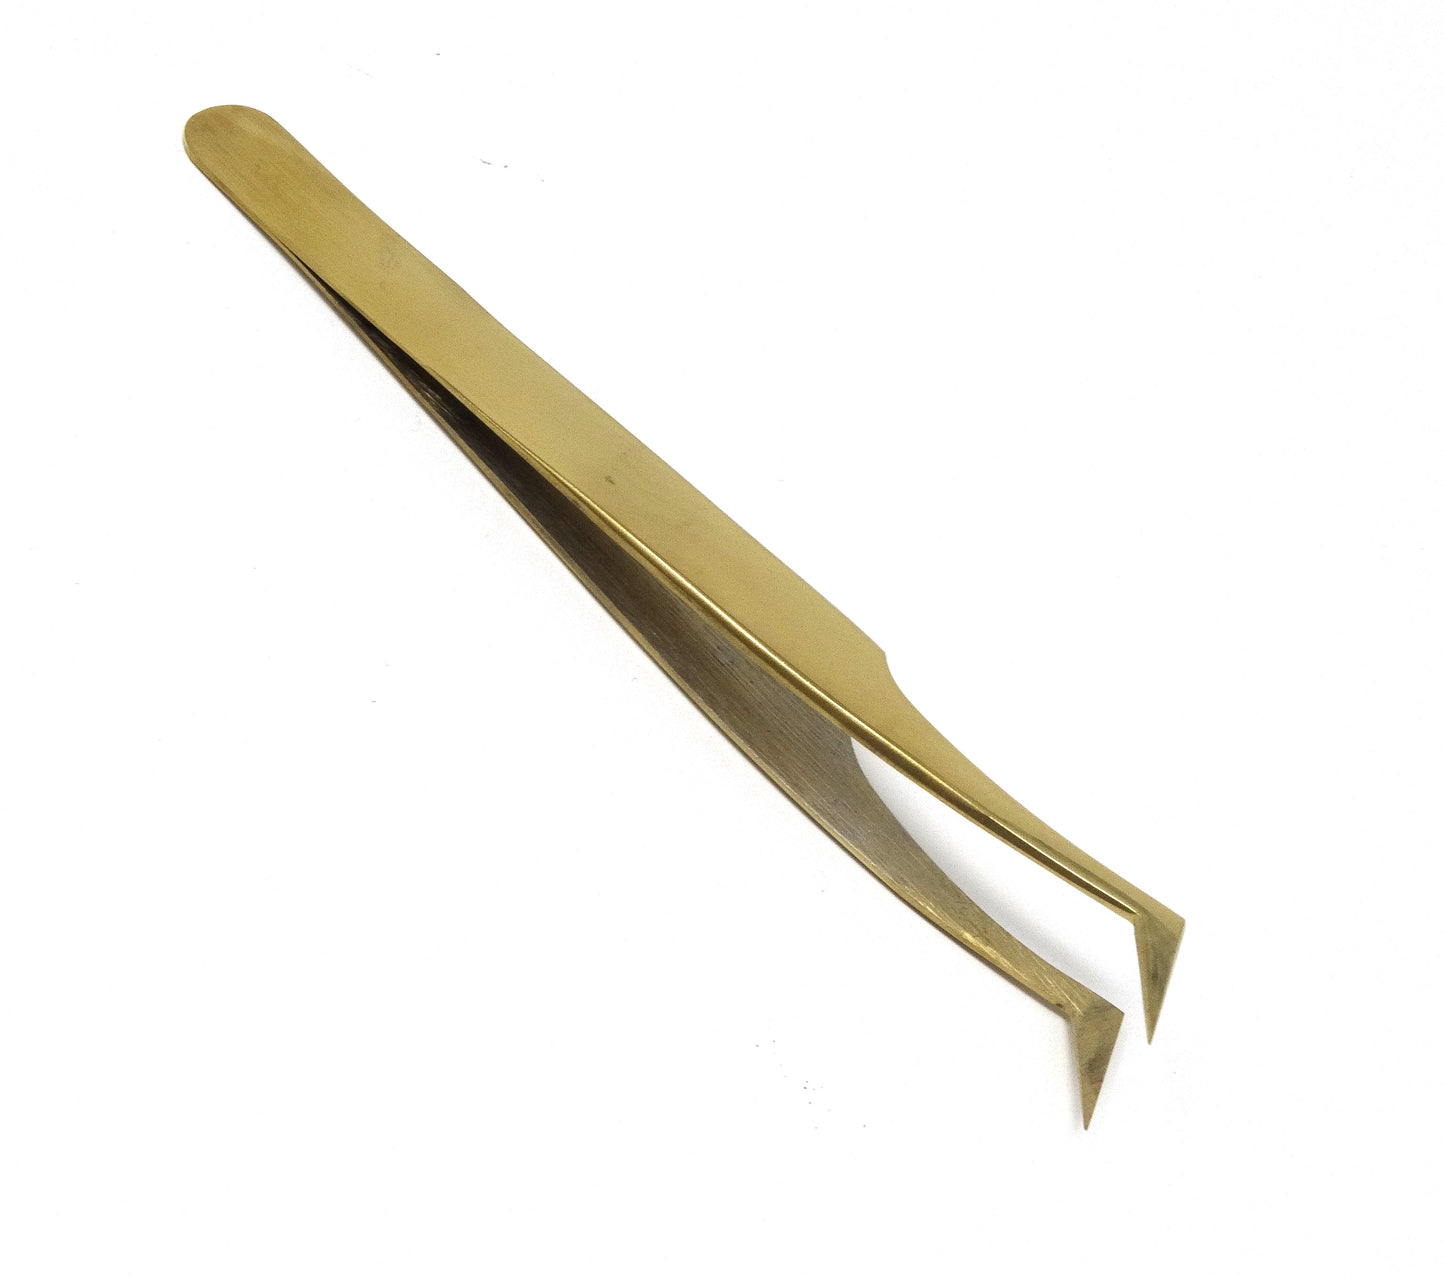 Stainless Steel Watch & Jewelery Repair Tweezers #6 Forceps, Fine Point, Gold Plated, Premium Quality